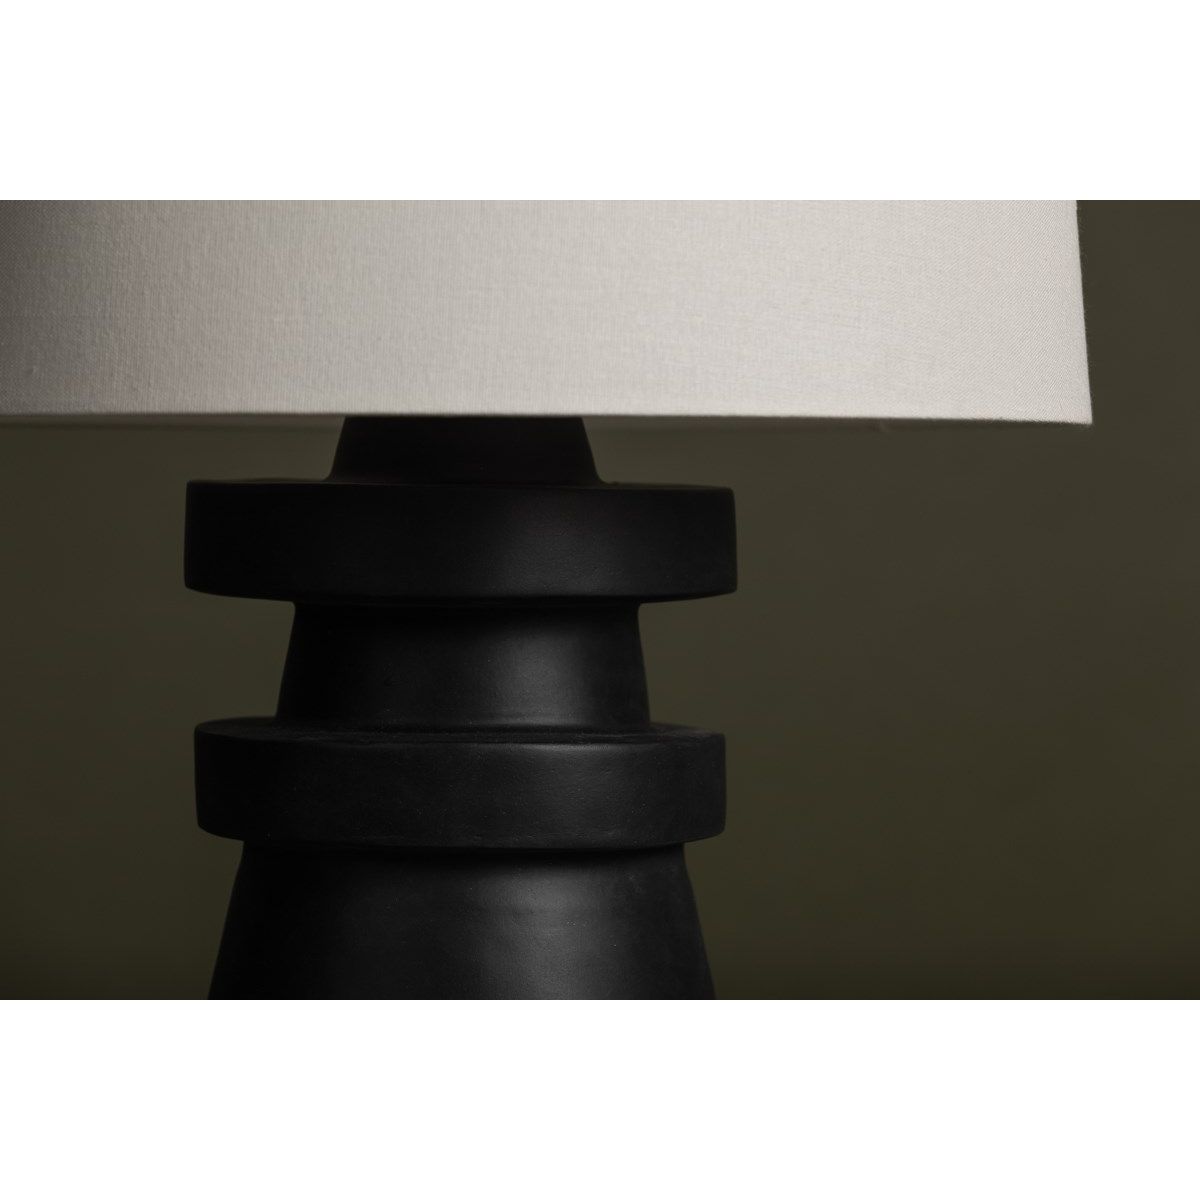 Grover Table Lamp Ceramic Charcoal with Patina Brass Accents